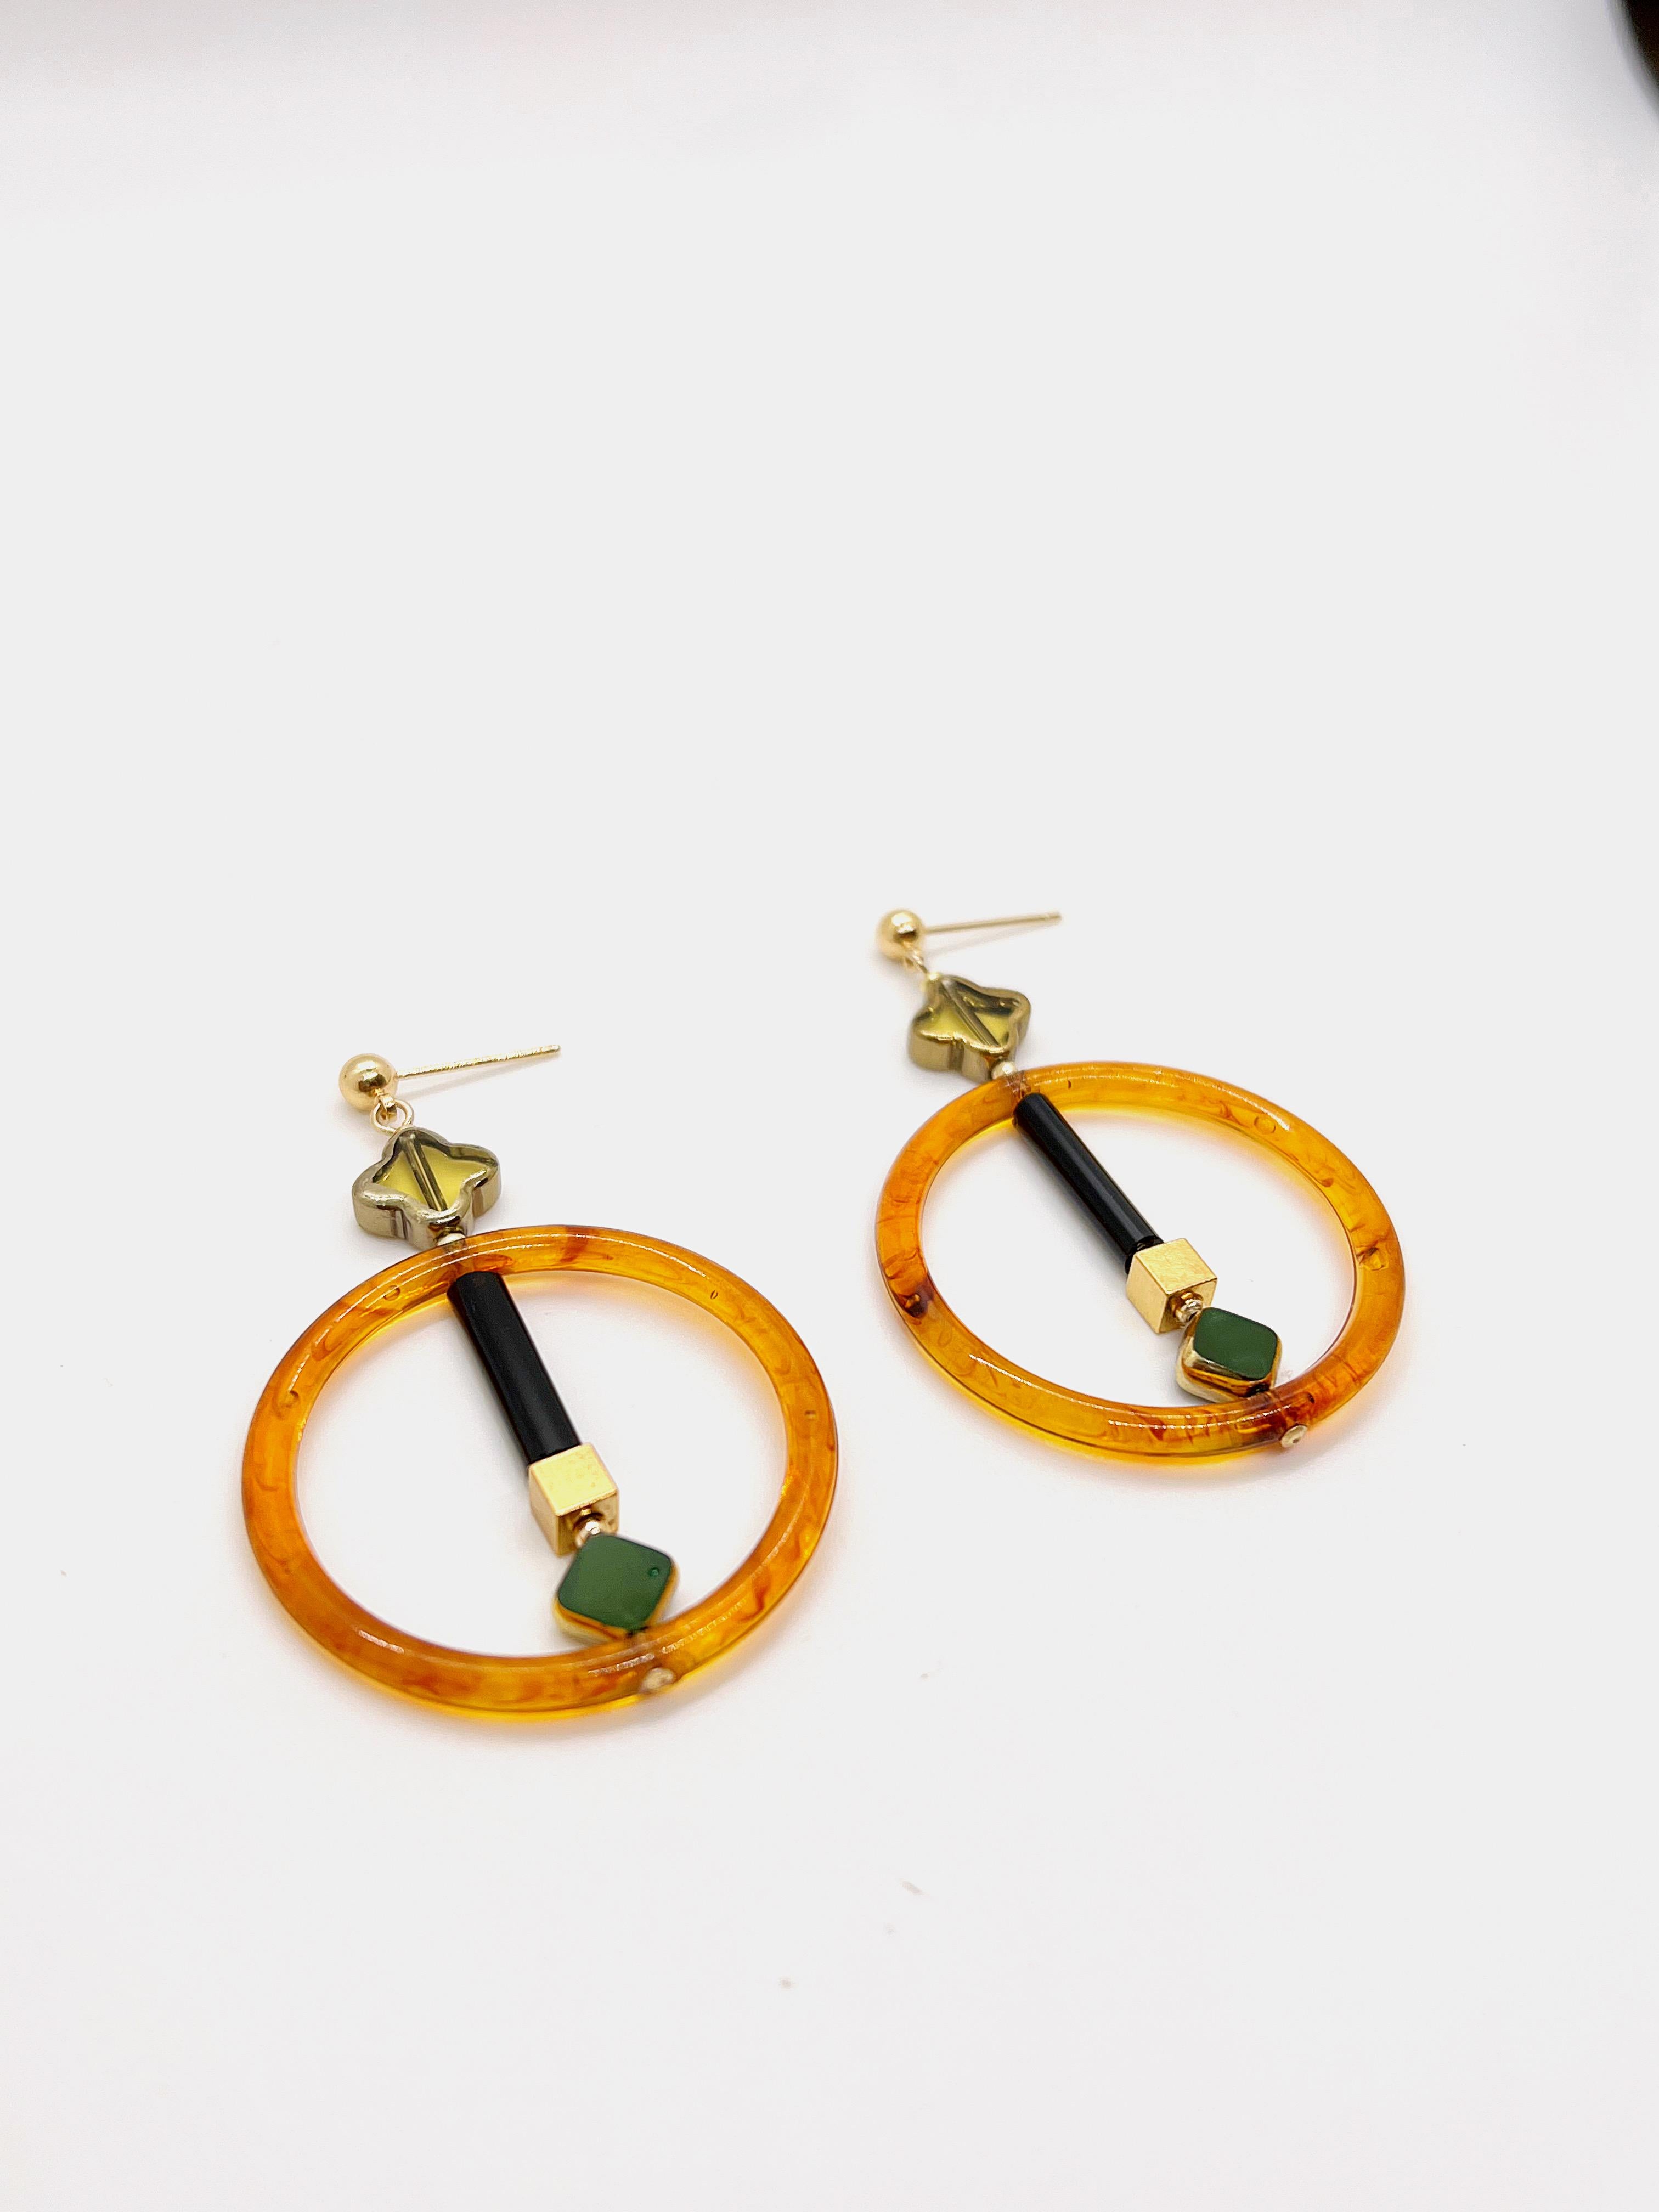 These earrings are light weight and very comfortable to wear all day. Each earring consist of Green vintage German glass beads edged with gold, vintage 4 point star Czech beads, vintage lucite, brass metal plated with 24K gold, gold-filled findings